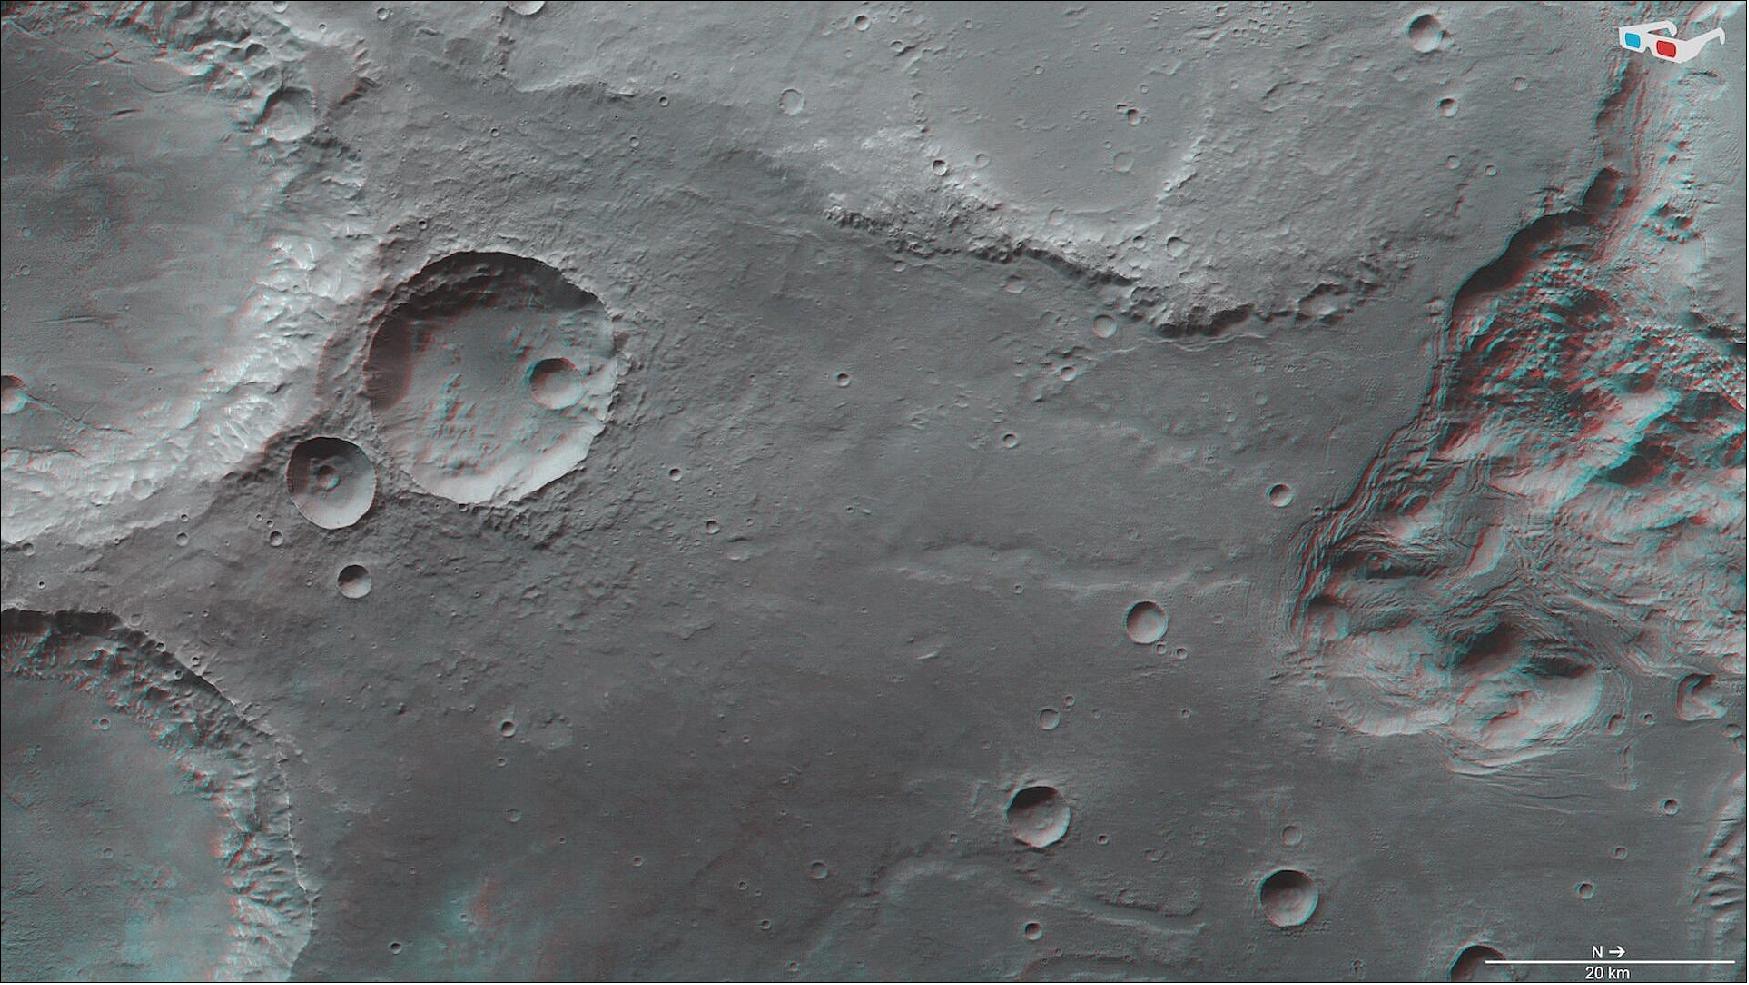 Figure 69: This image shows craters, valleys and chaotic terrain in Mars’ Pyrrhae Regio in 3D when viewed using red-green or red-blue glasses. This anaglyph was derived from data obtained by the nadir and stereo channels of the High Resolution Stereo Camera (HRSC) on ESA’s Mars Express during spacecraft orbit 20972 (3 August 2020). It covers a part of the martian surface centered at 322ºE/16ºS. North is to the right (image credit: ESA/DLR/FU Berlin, CC BY-SA 3.0 IGO)